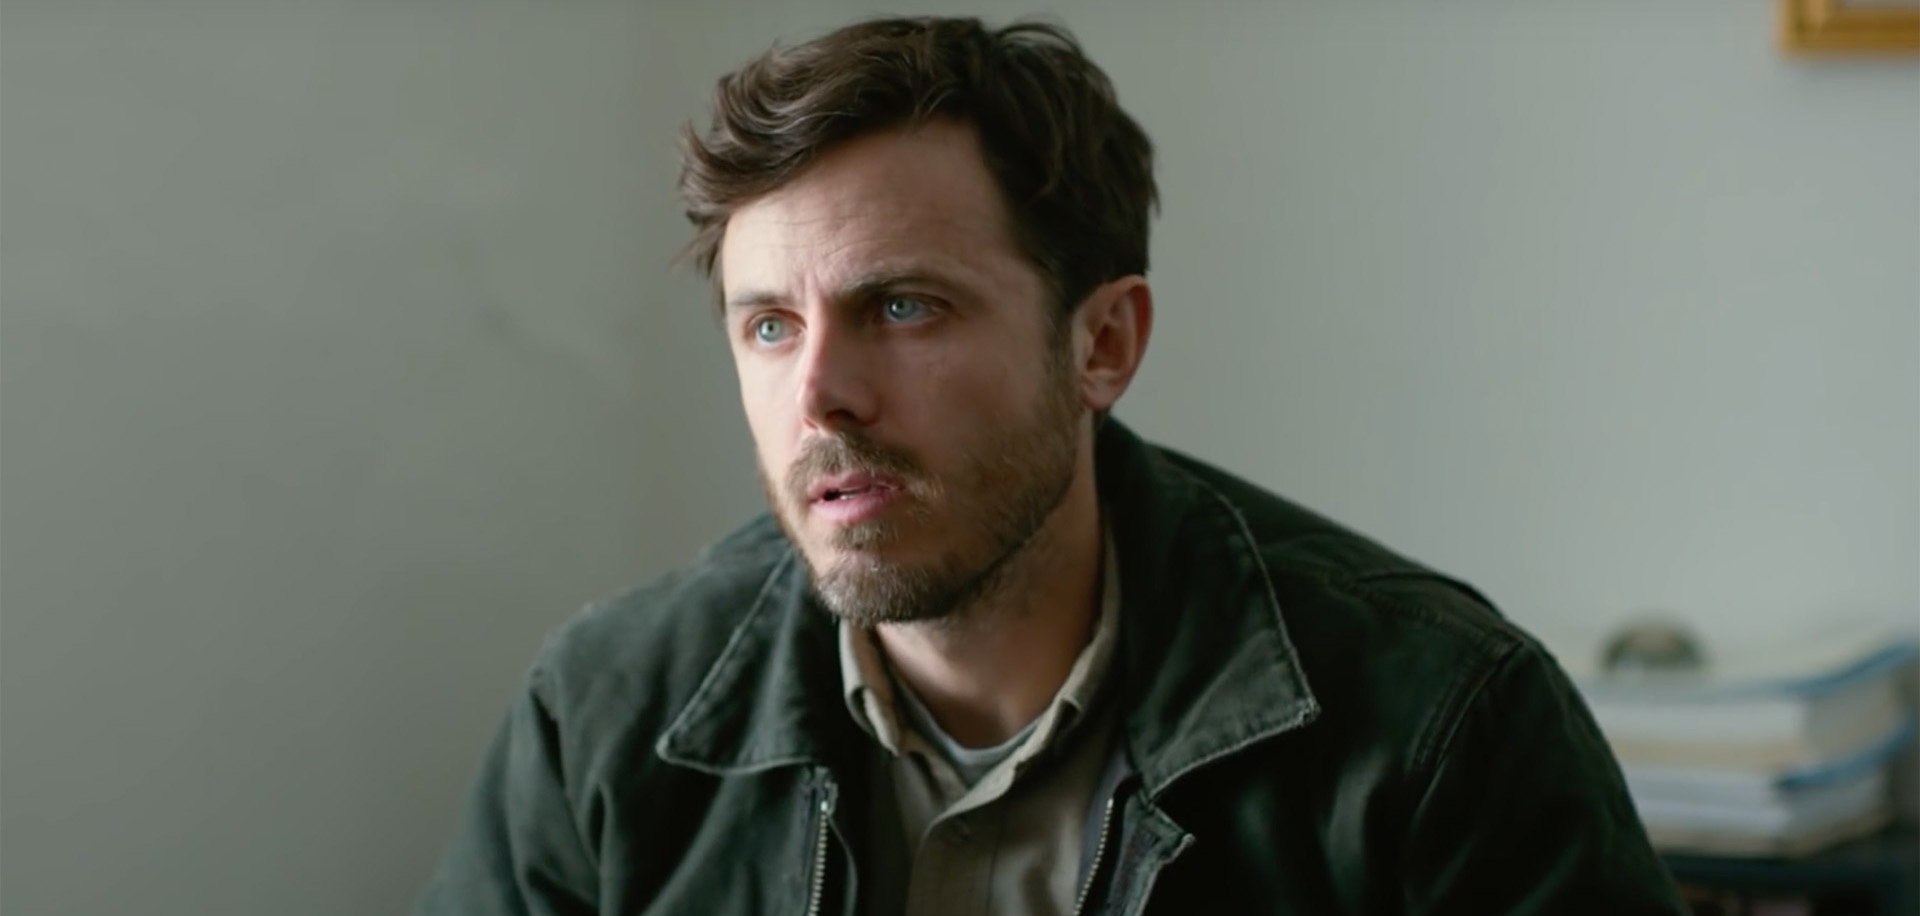 Casey-Affleck-in-Manchester-By-The-Sea-Trailer.jpg